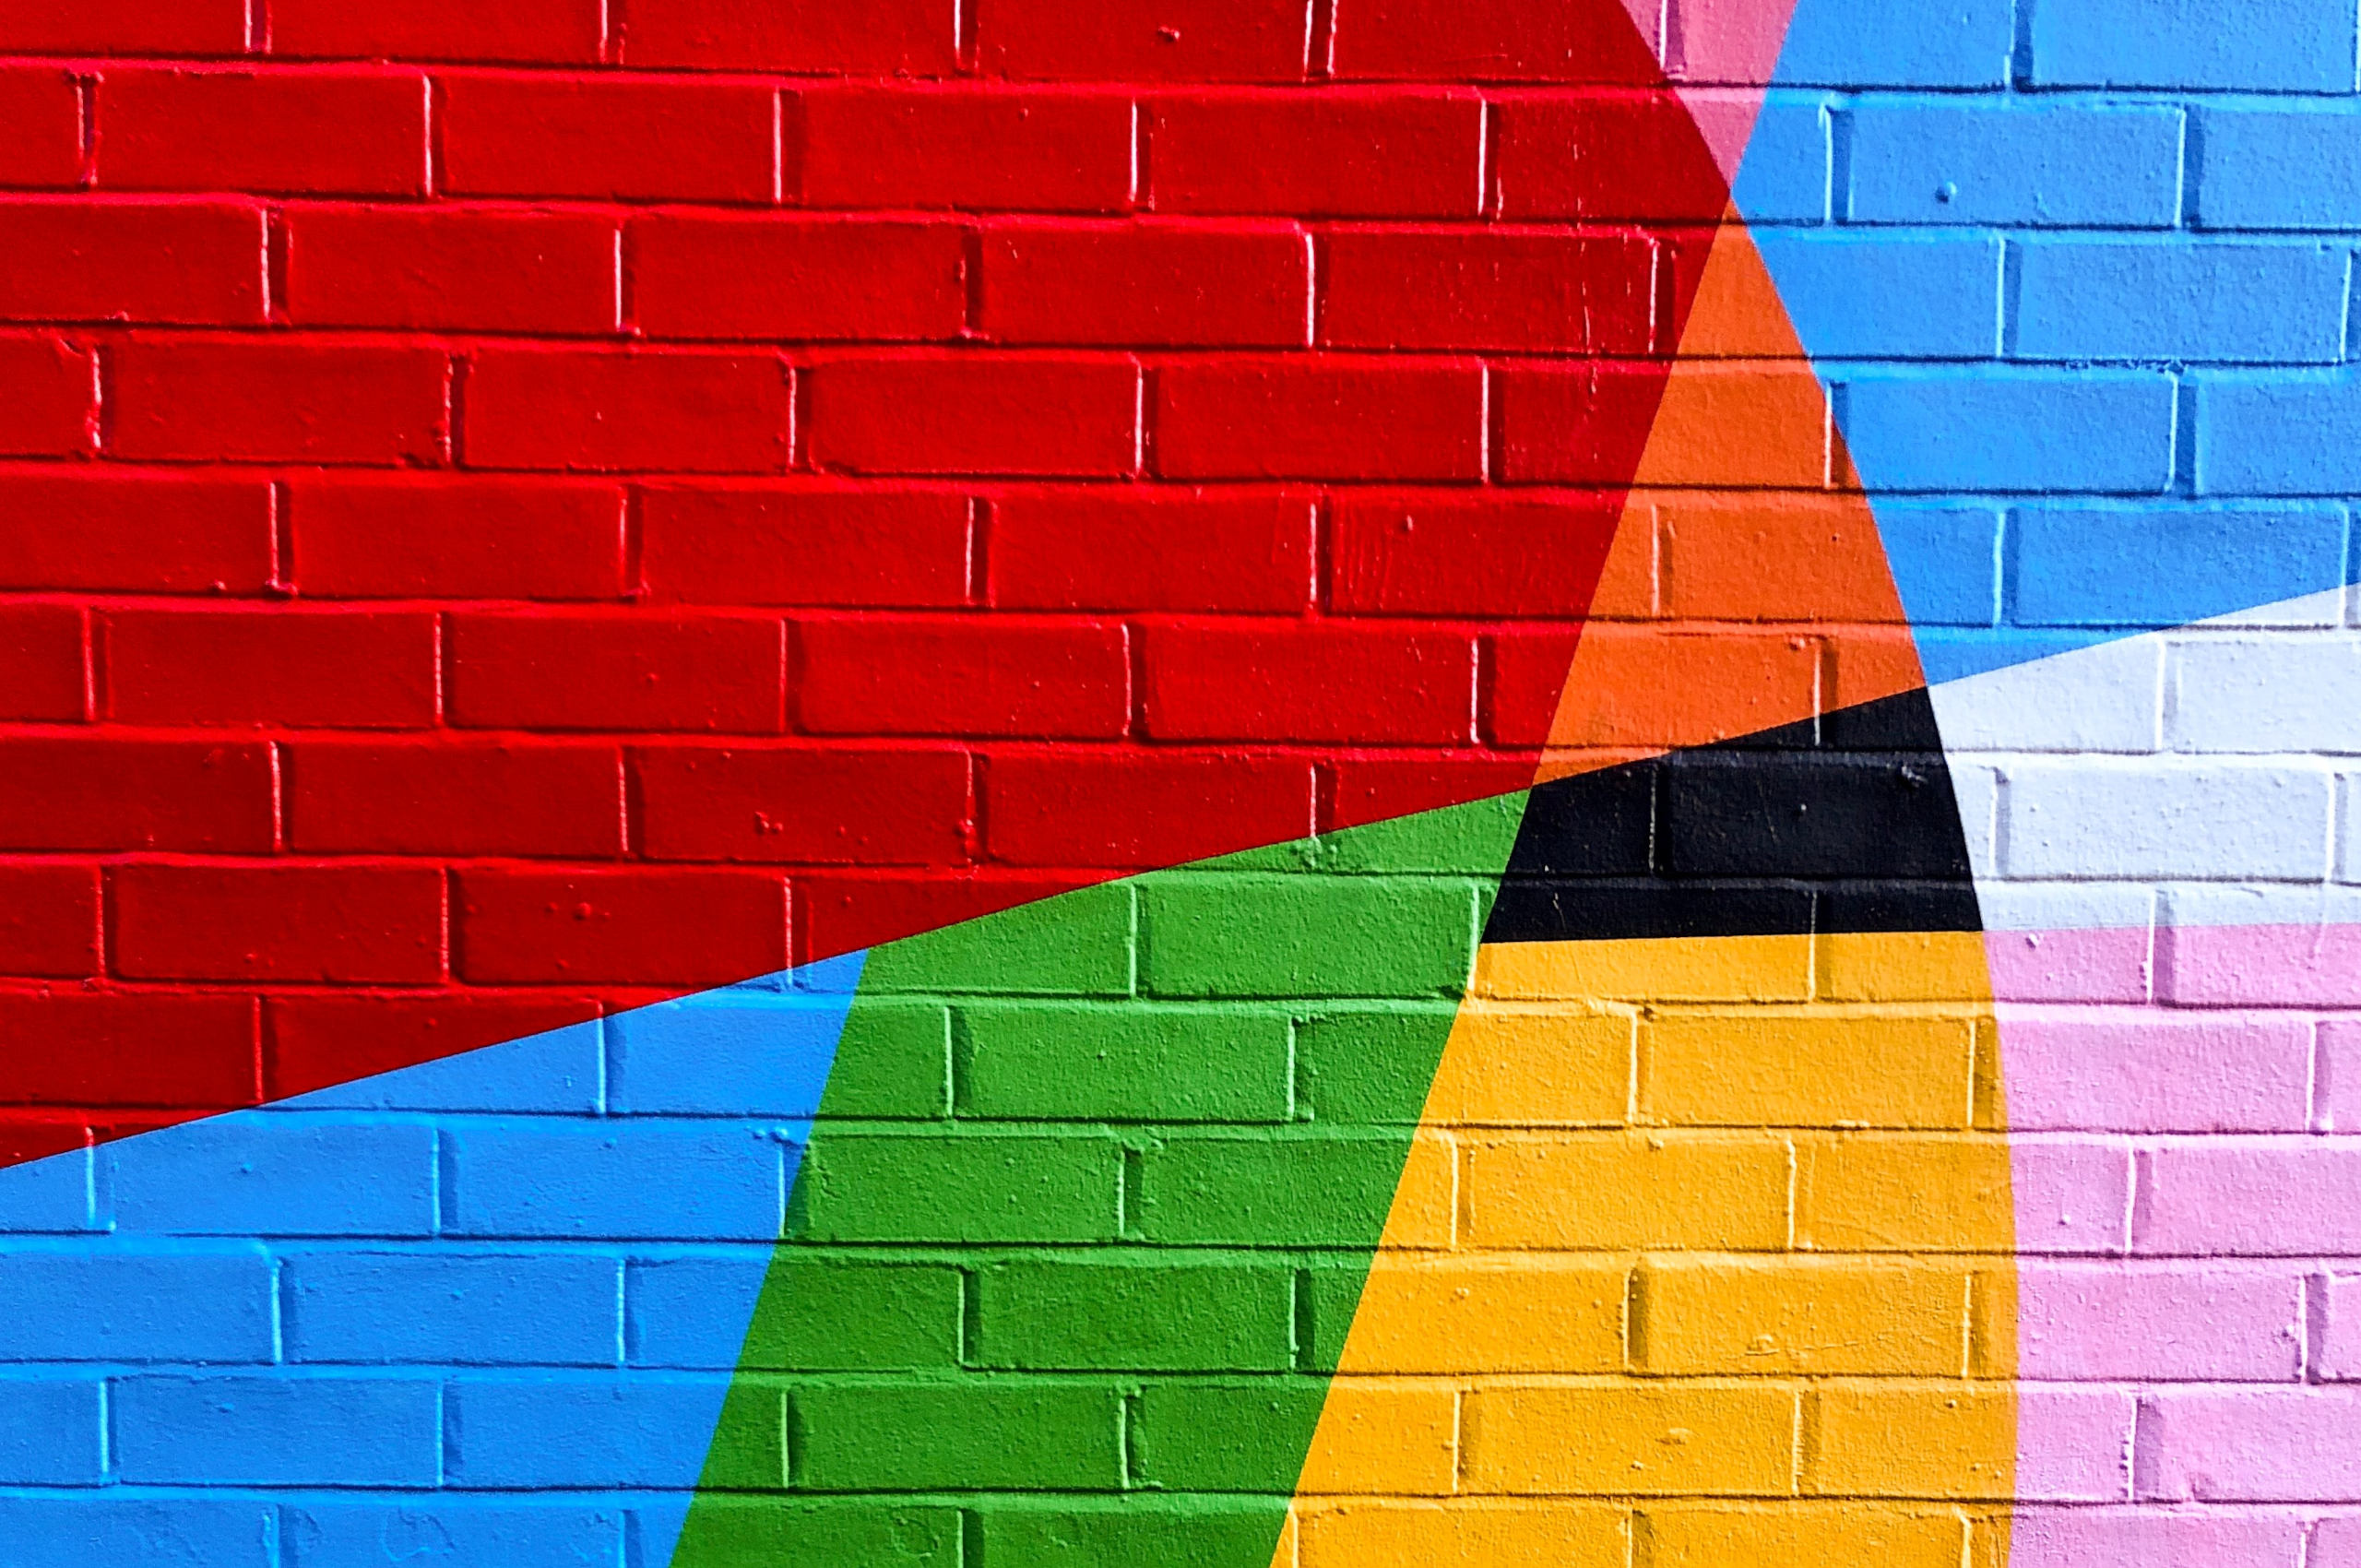 Brick wall painted with a colourful mural of bright geometric shapes